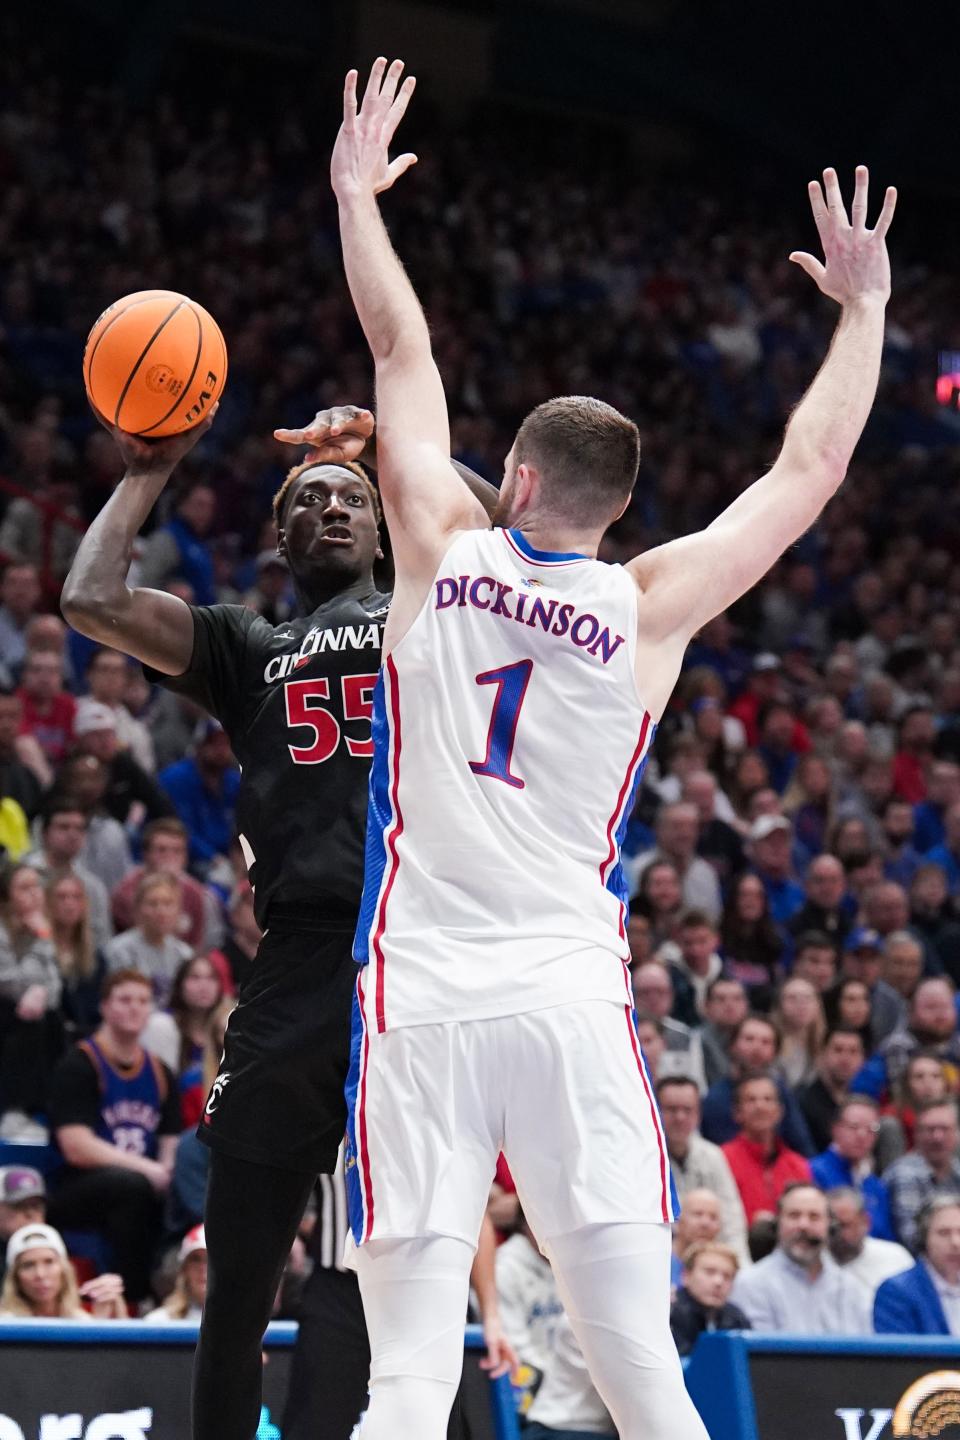 Cincinnati forward Aziz Bandaogo (55) shoots and is fouled by Kansas center Hunter Dickinson (1) during the first half of a basketball game Monday at Allen Fieldhouse.